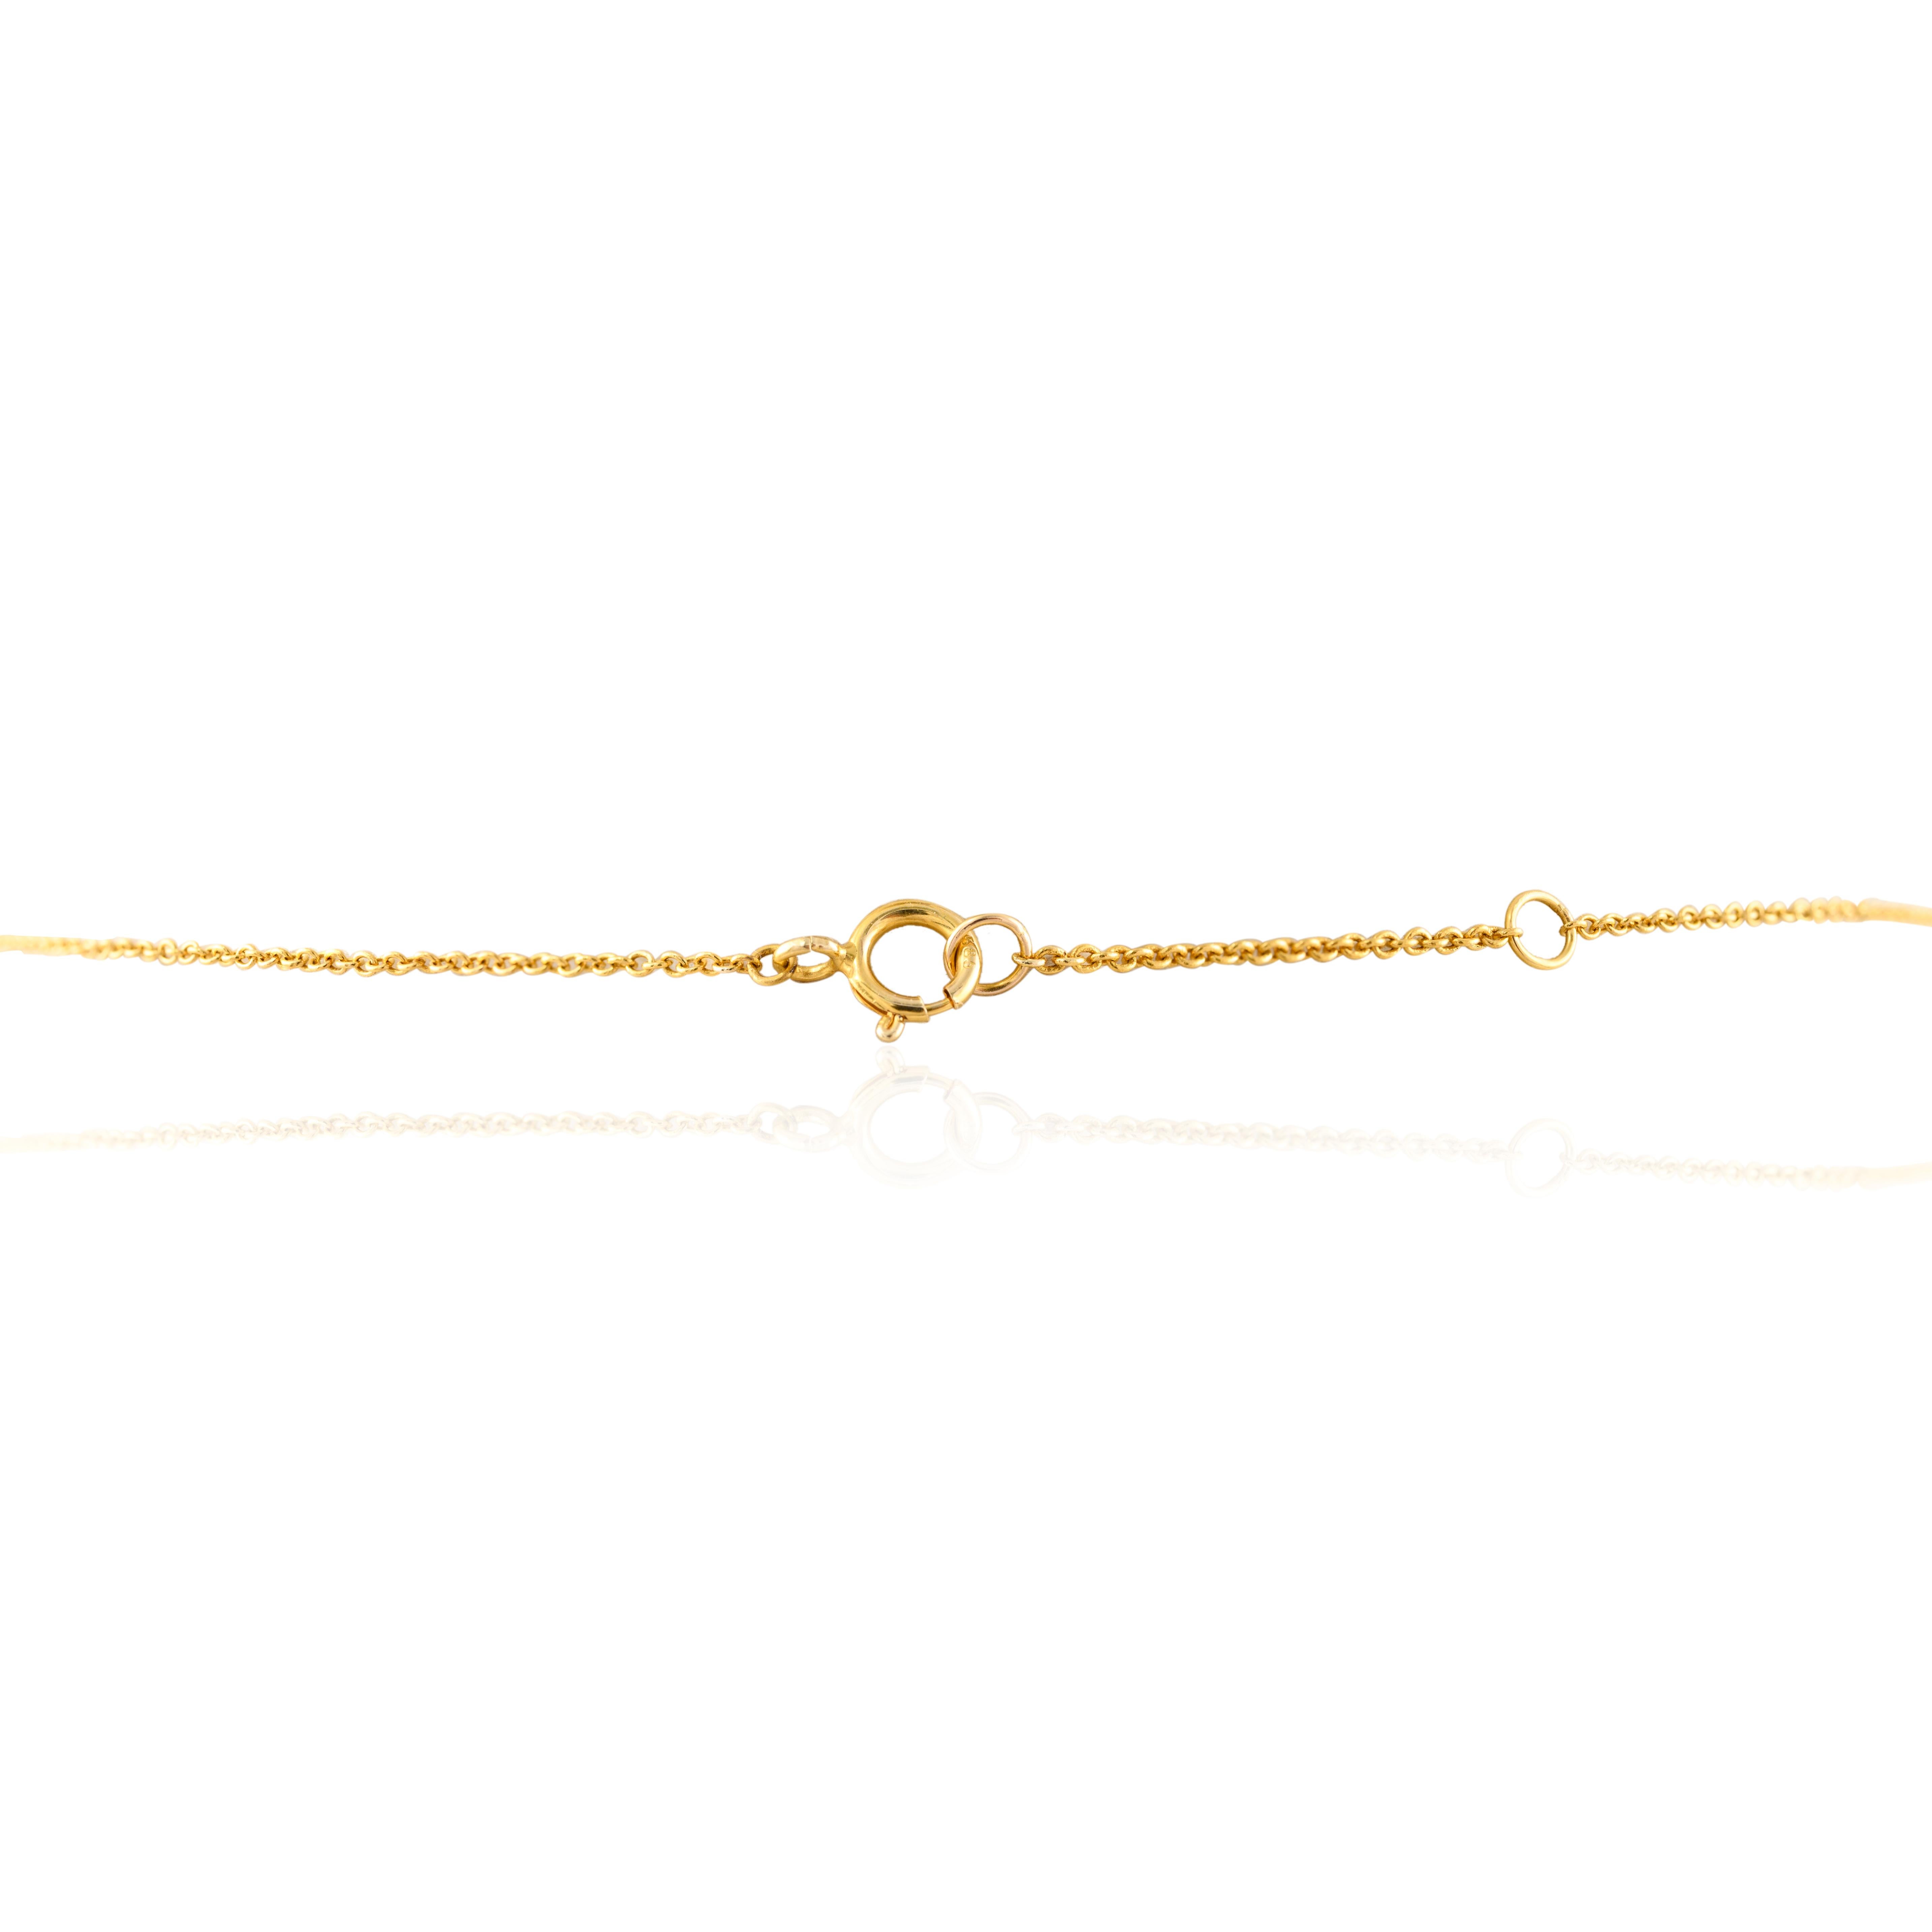 Modern Dainty Diamond Star Chain Necklace 14k Solid Yellow Gold, Daughter Gift For Sale